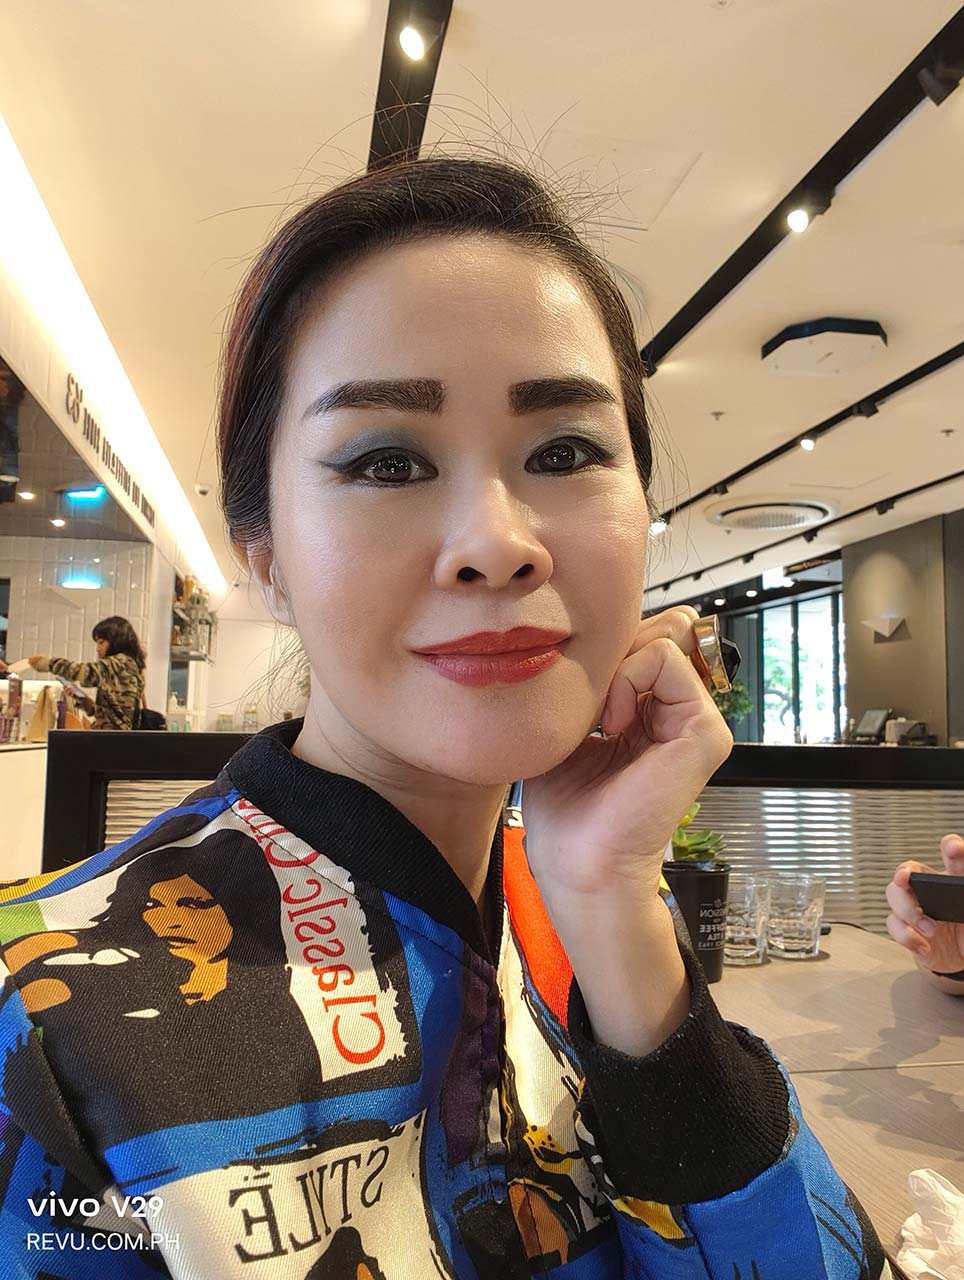 vivo-V29-5G-camera-sample-selfie-picture-in-full-review-by-Revu-Philippines-b